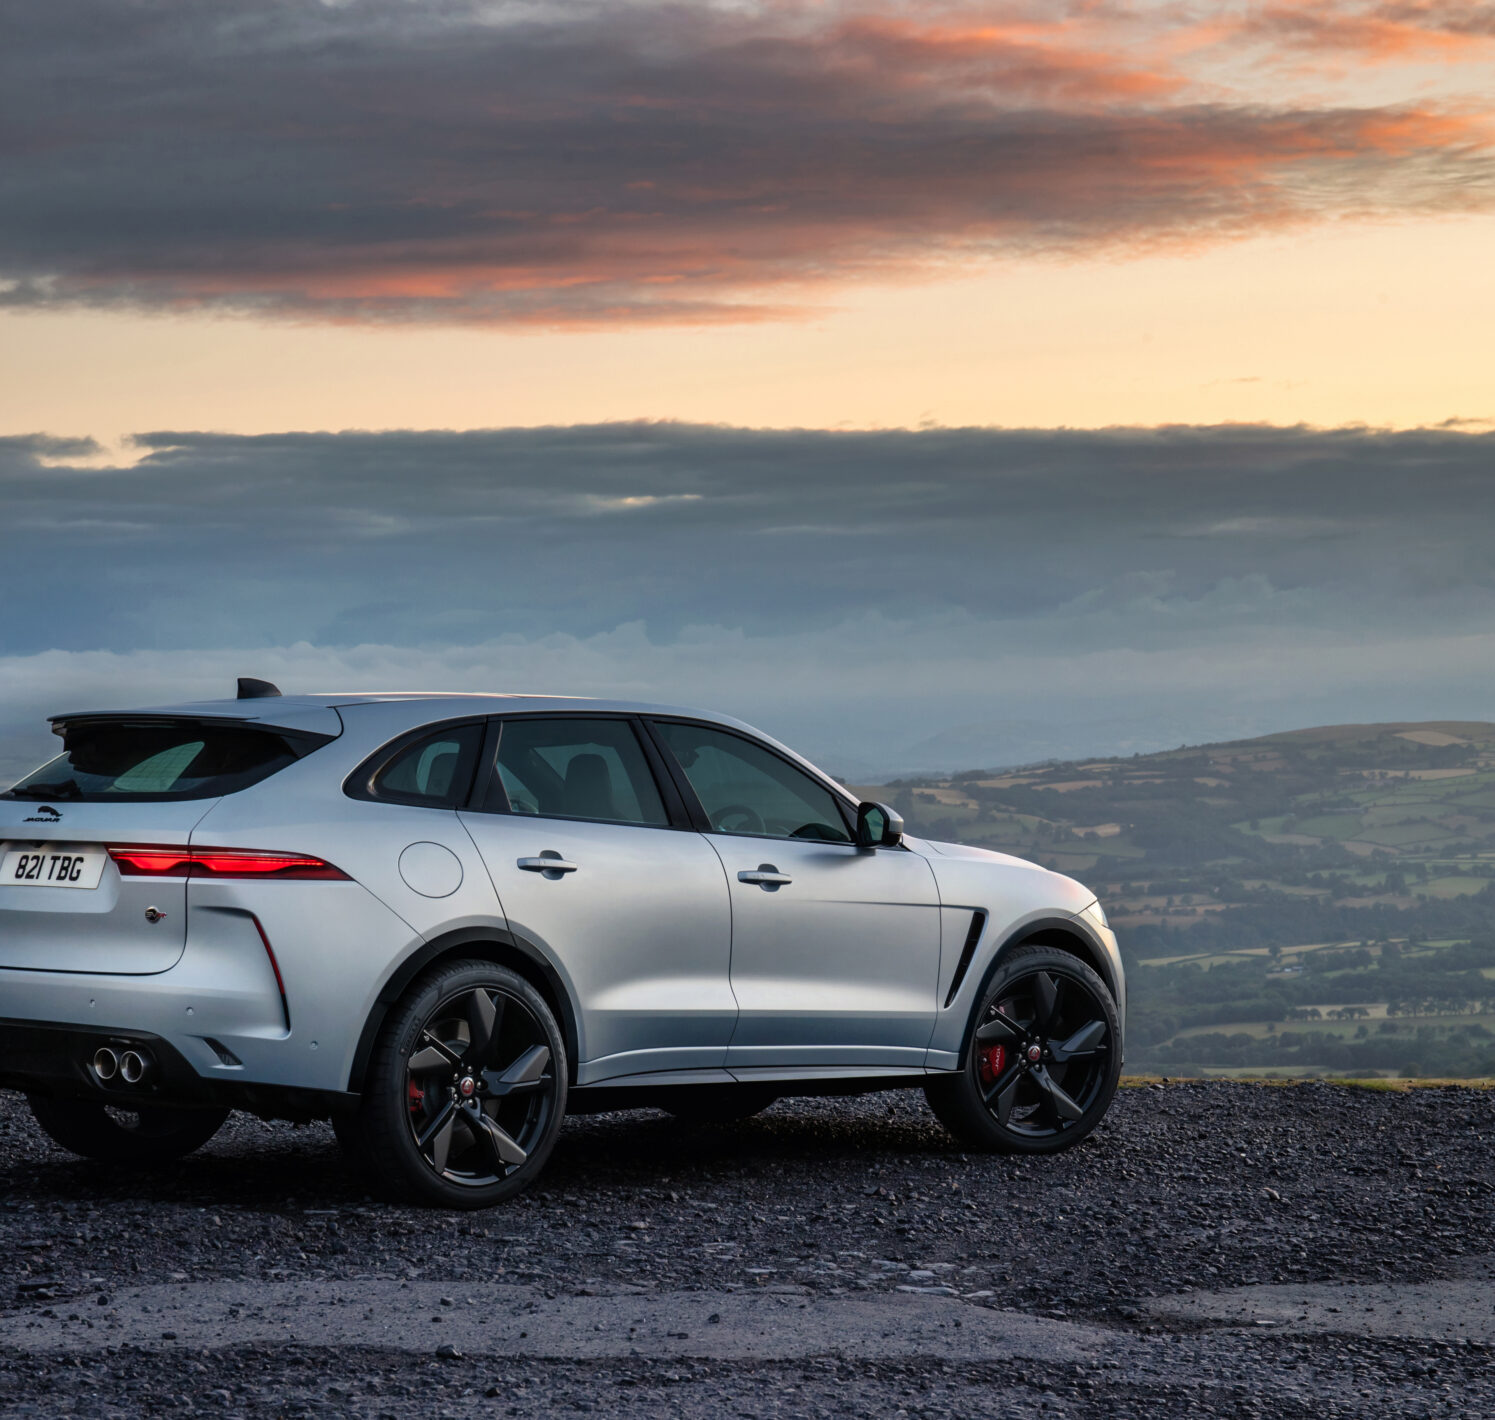 https://autofilter.sk/assets/images/f-pace-svr/gallery/Jag_F-PACE_SVR_22MY_Exterior_Rear_3-4_006_ND_110821.jpg - obrazok